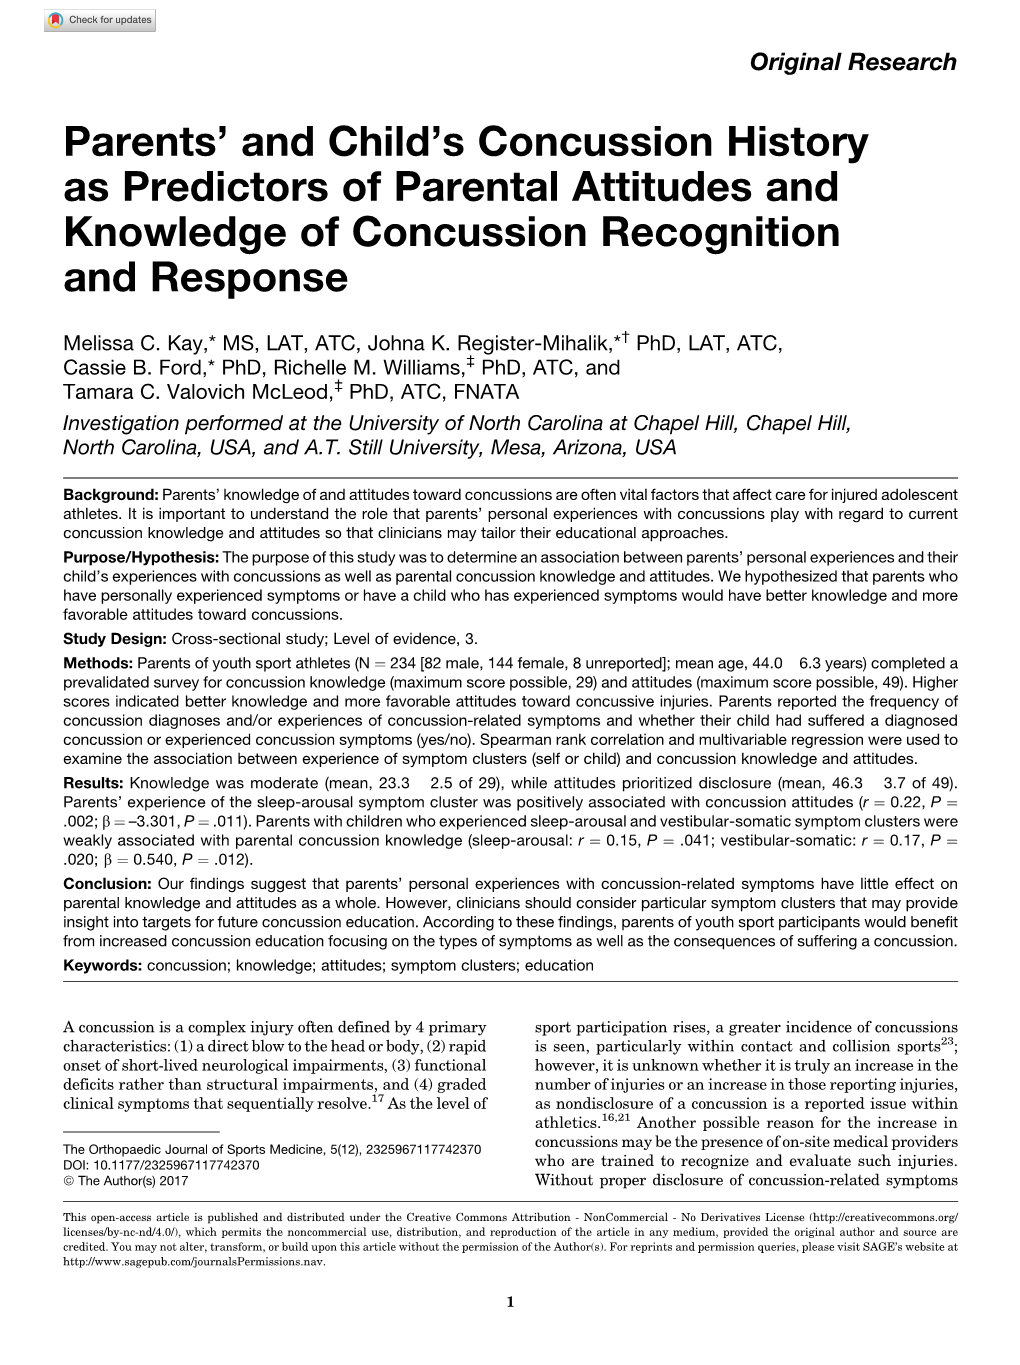 Parents' and Child's Concussion History As Predictors of Parental